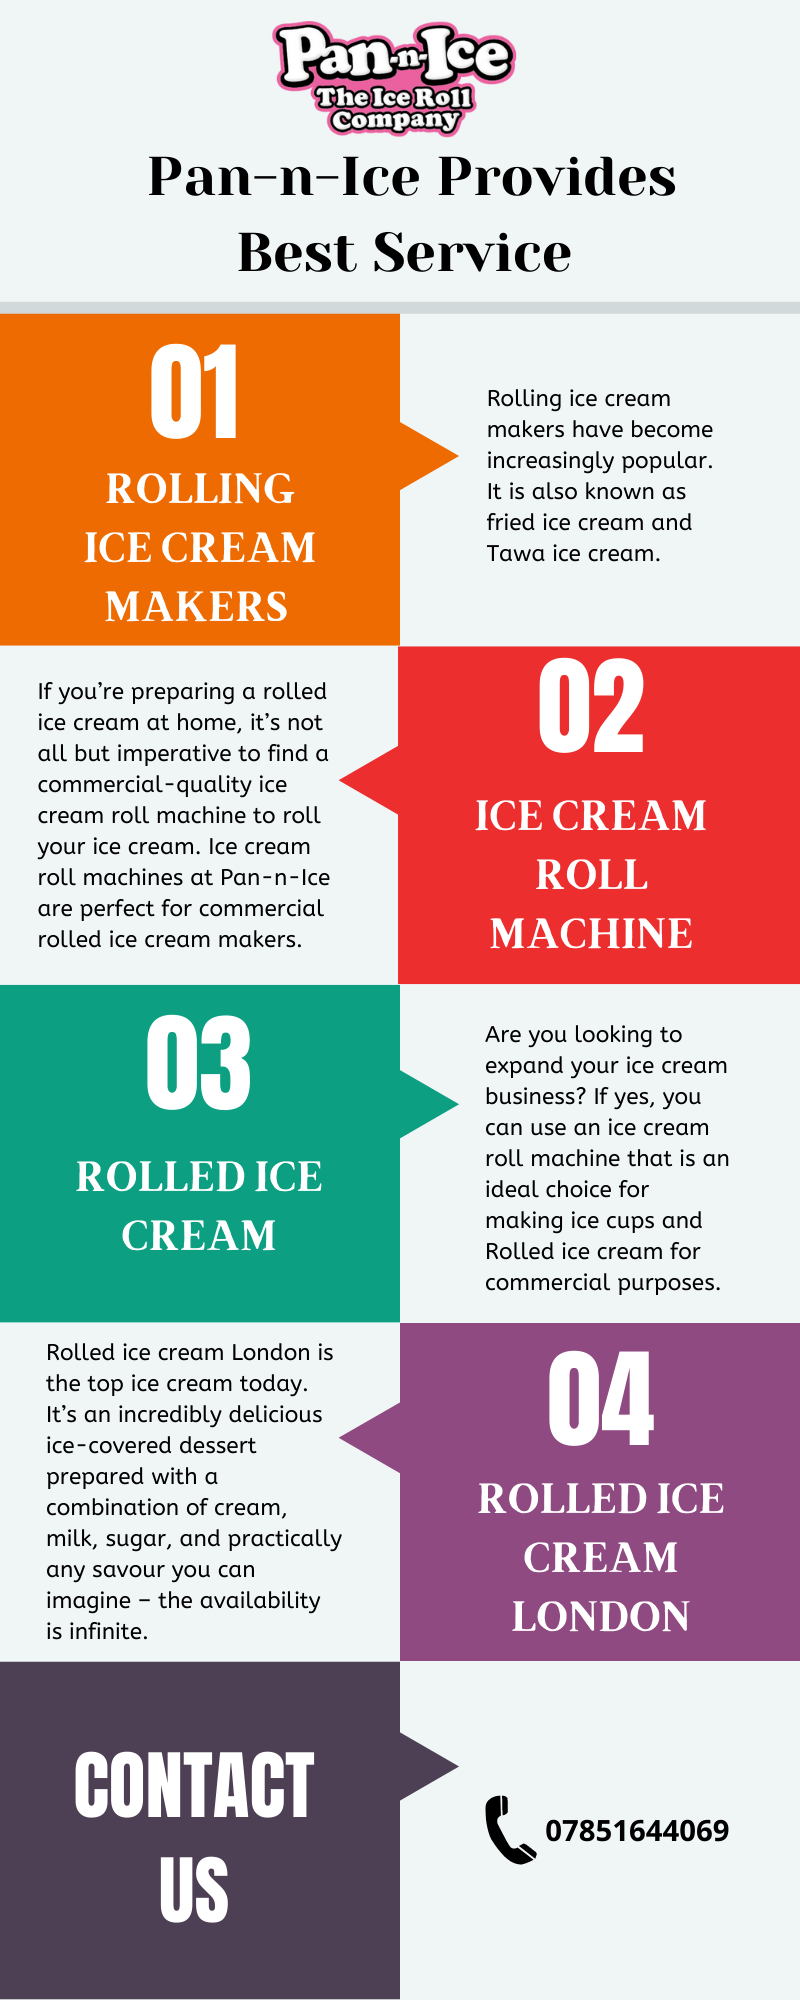 Get Your Rolled Ice Cream